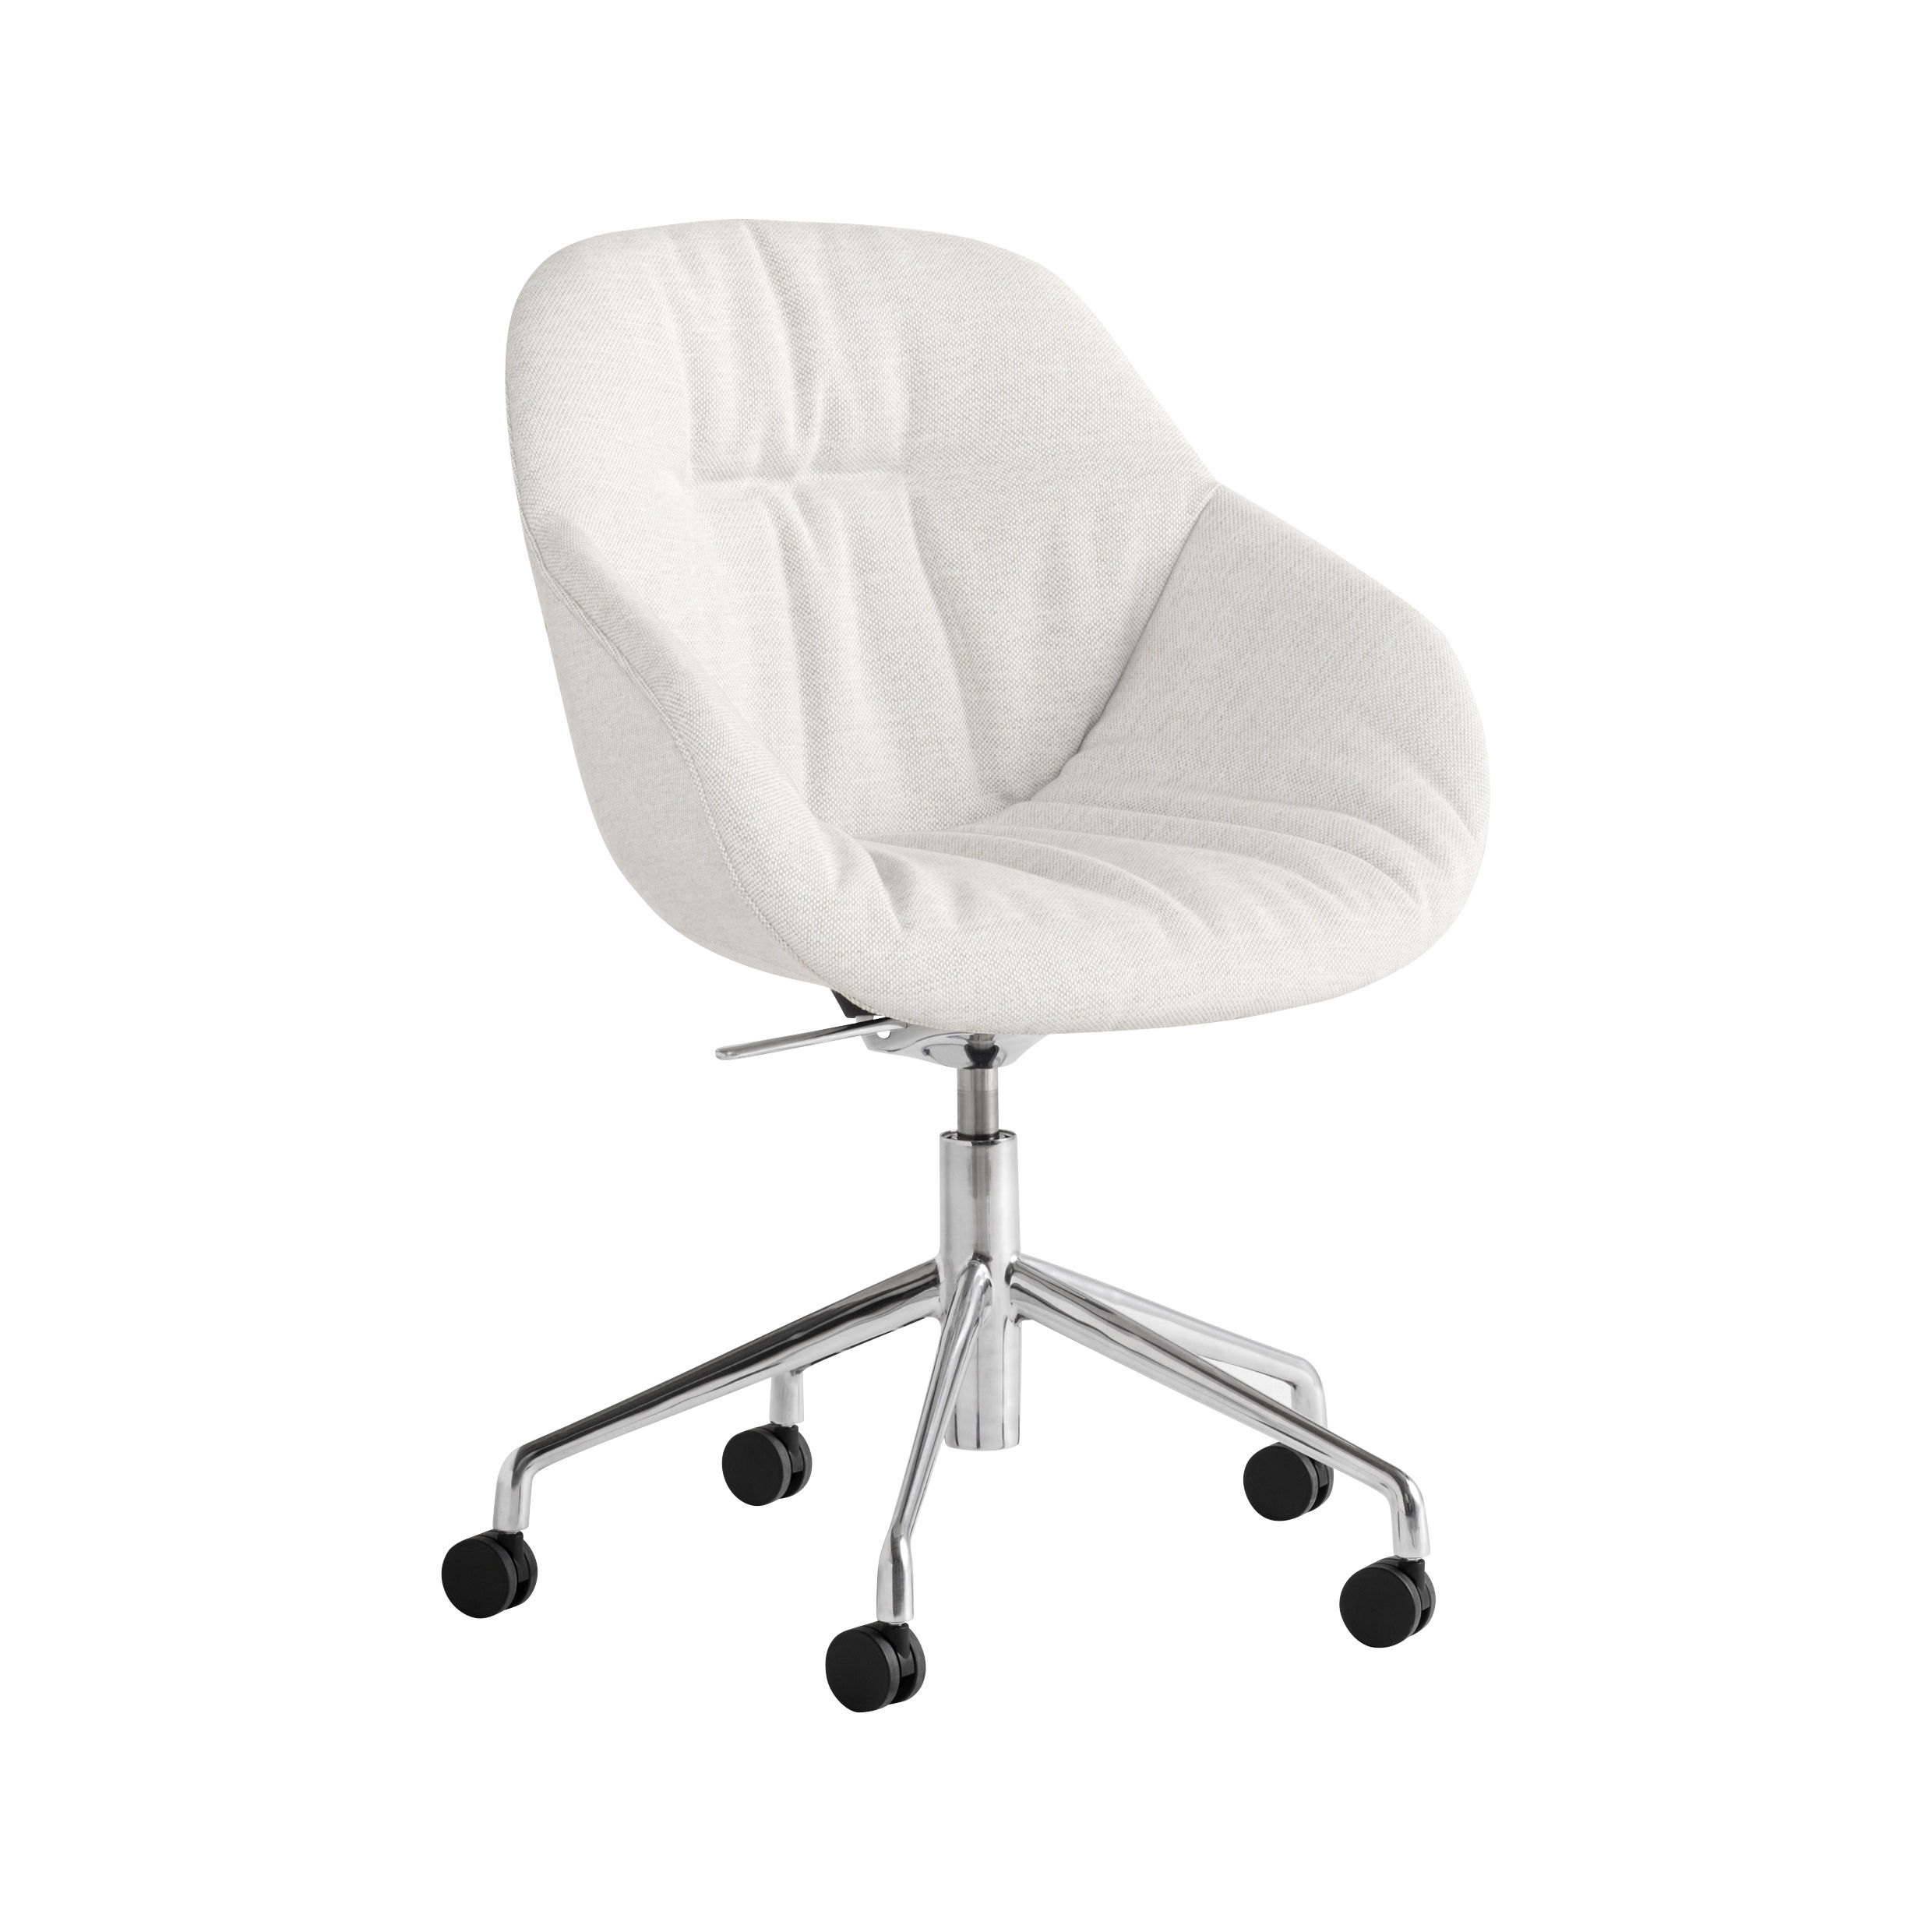 Poltrona a rotelle About a chair AAC155 SOFT di Hay - bianco